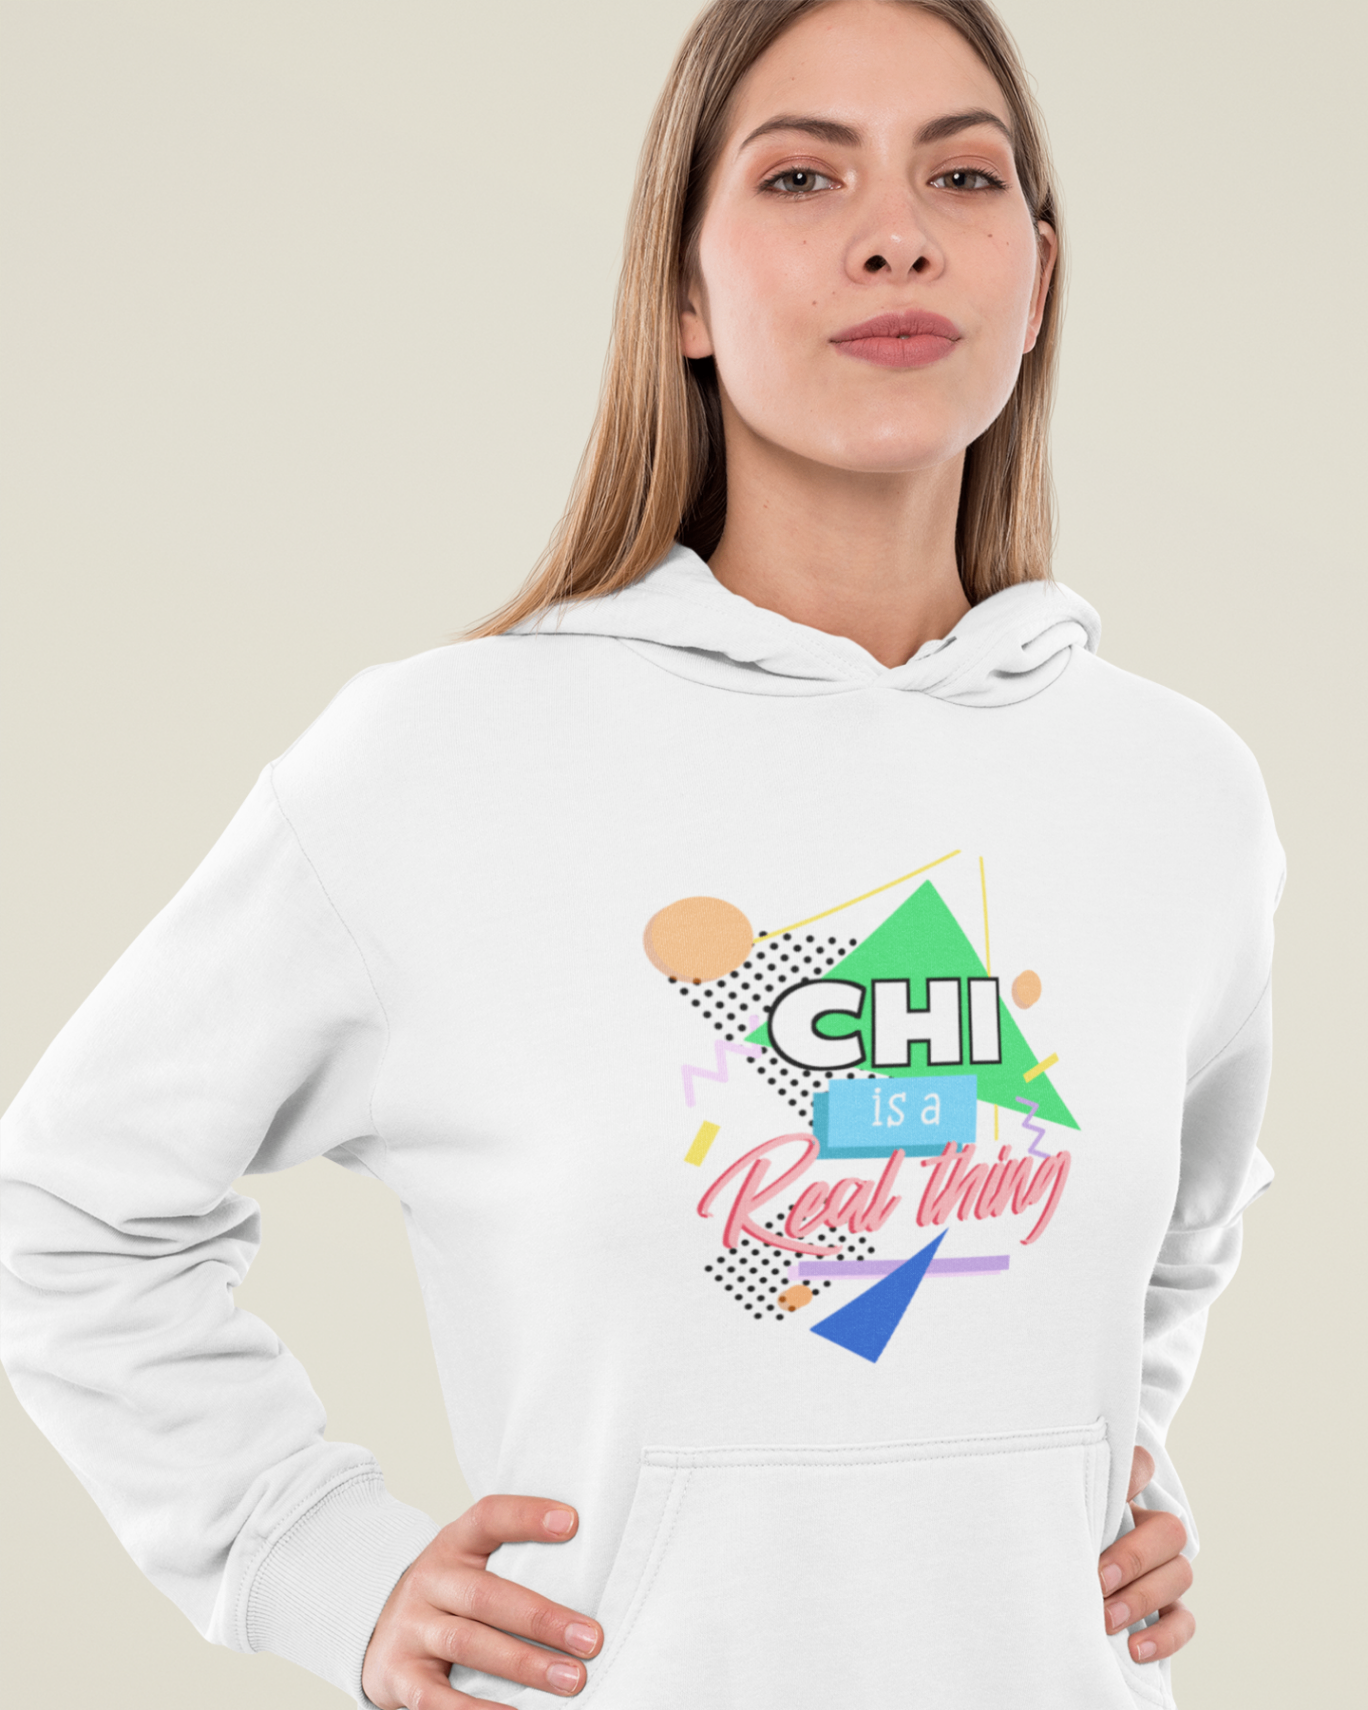  hoodie white 'chi is a real thing' design woman model studio mockup